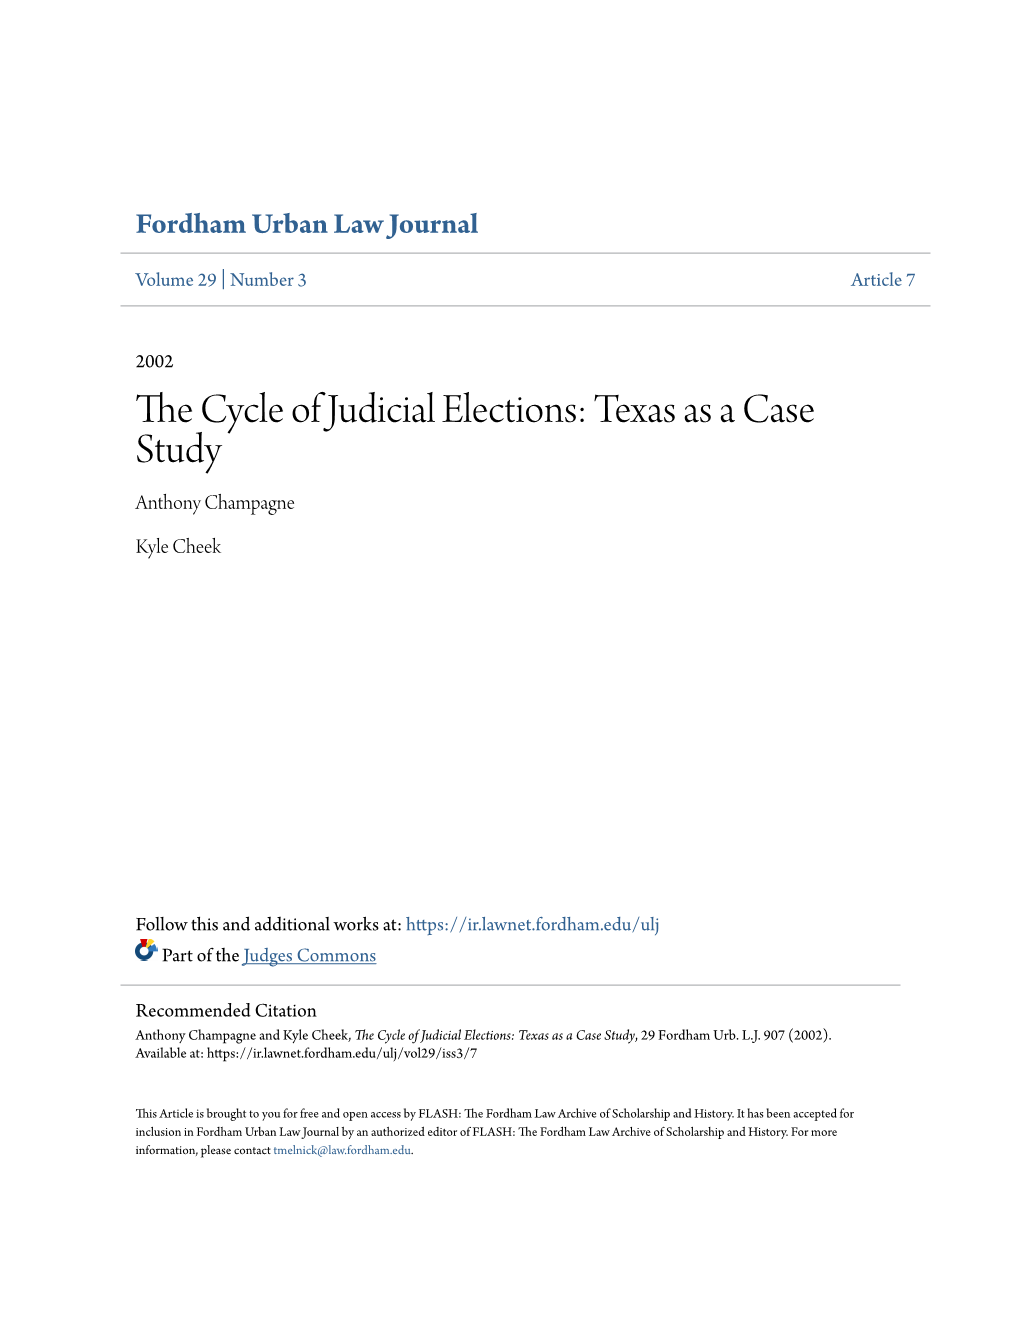 The Cycle of Judicial Elections: Texas As a Case Study, 29 Fordham Urb